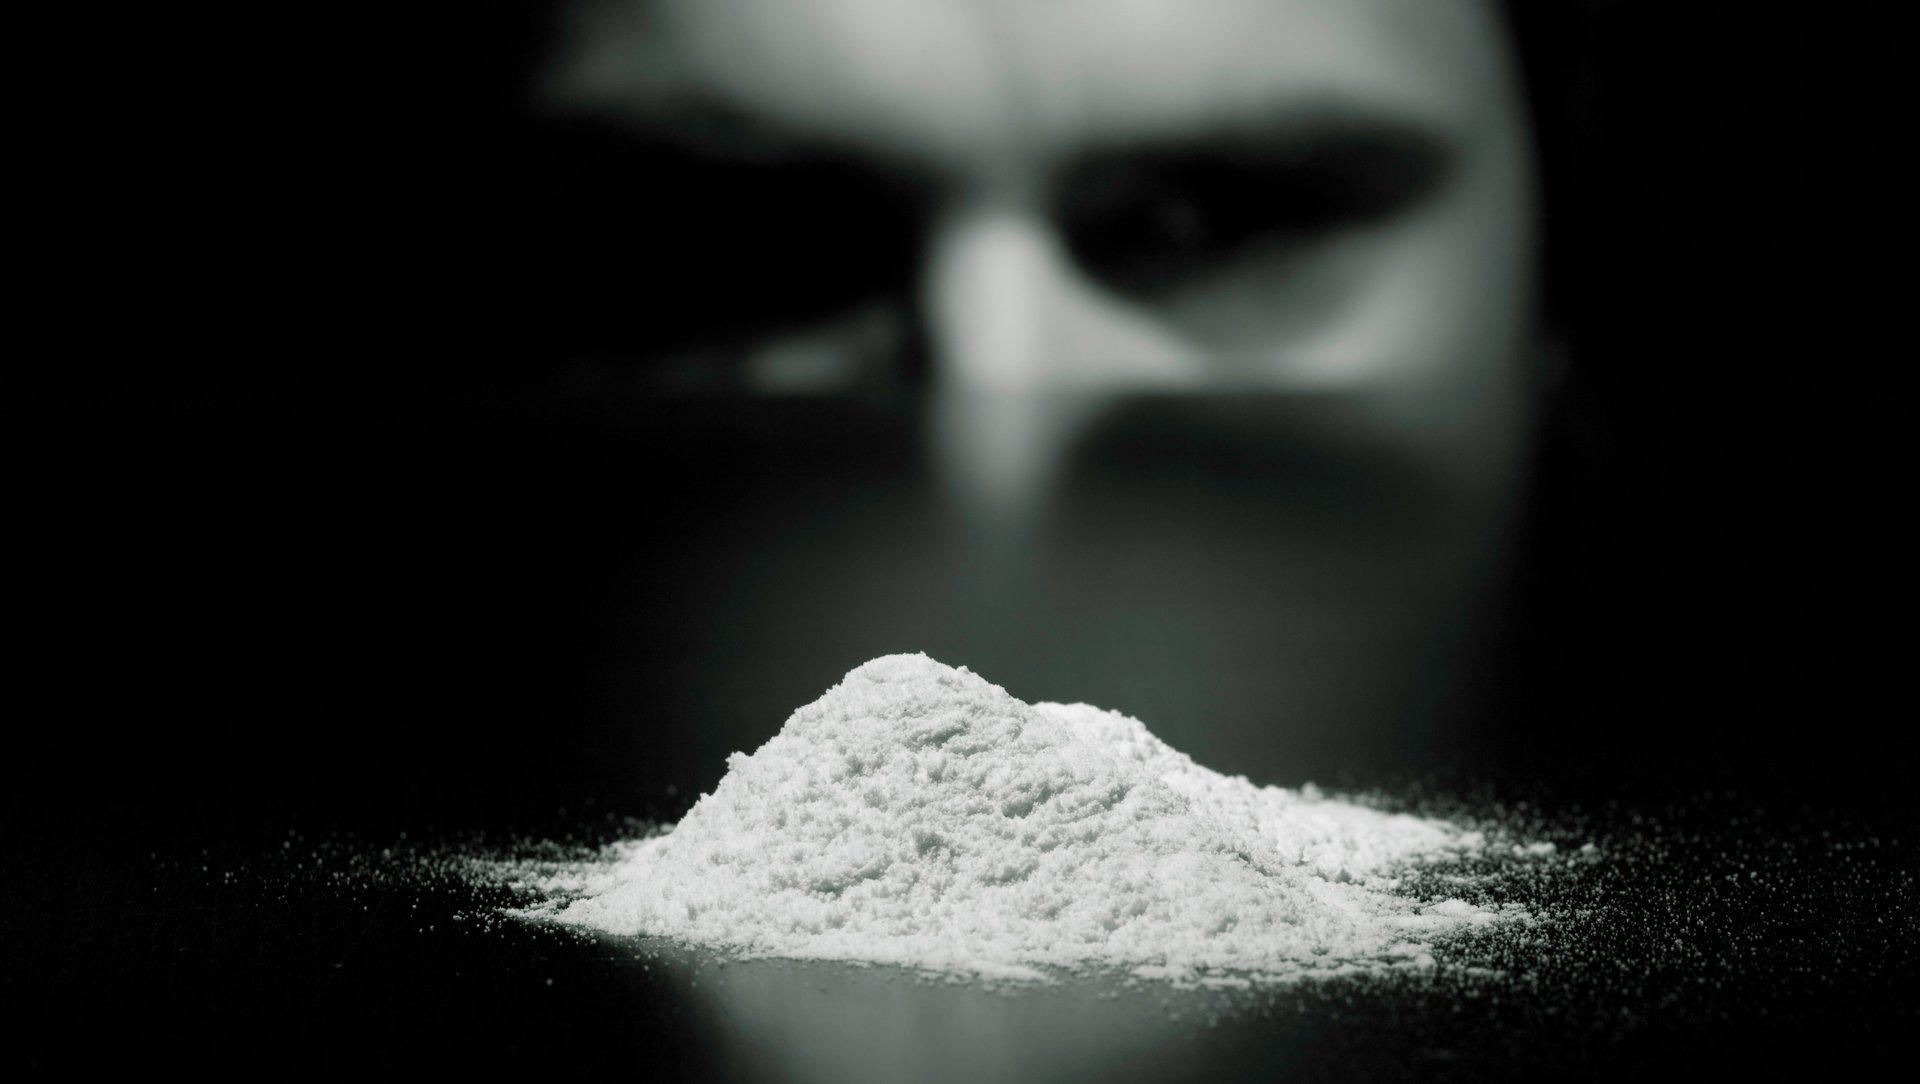 A pile of white powder with a blurred face in the background